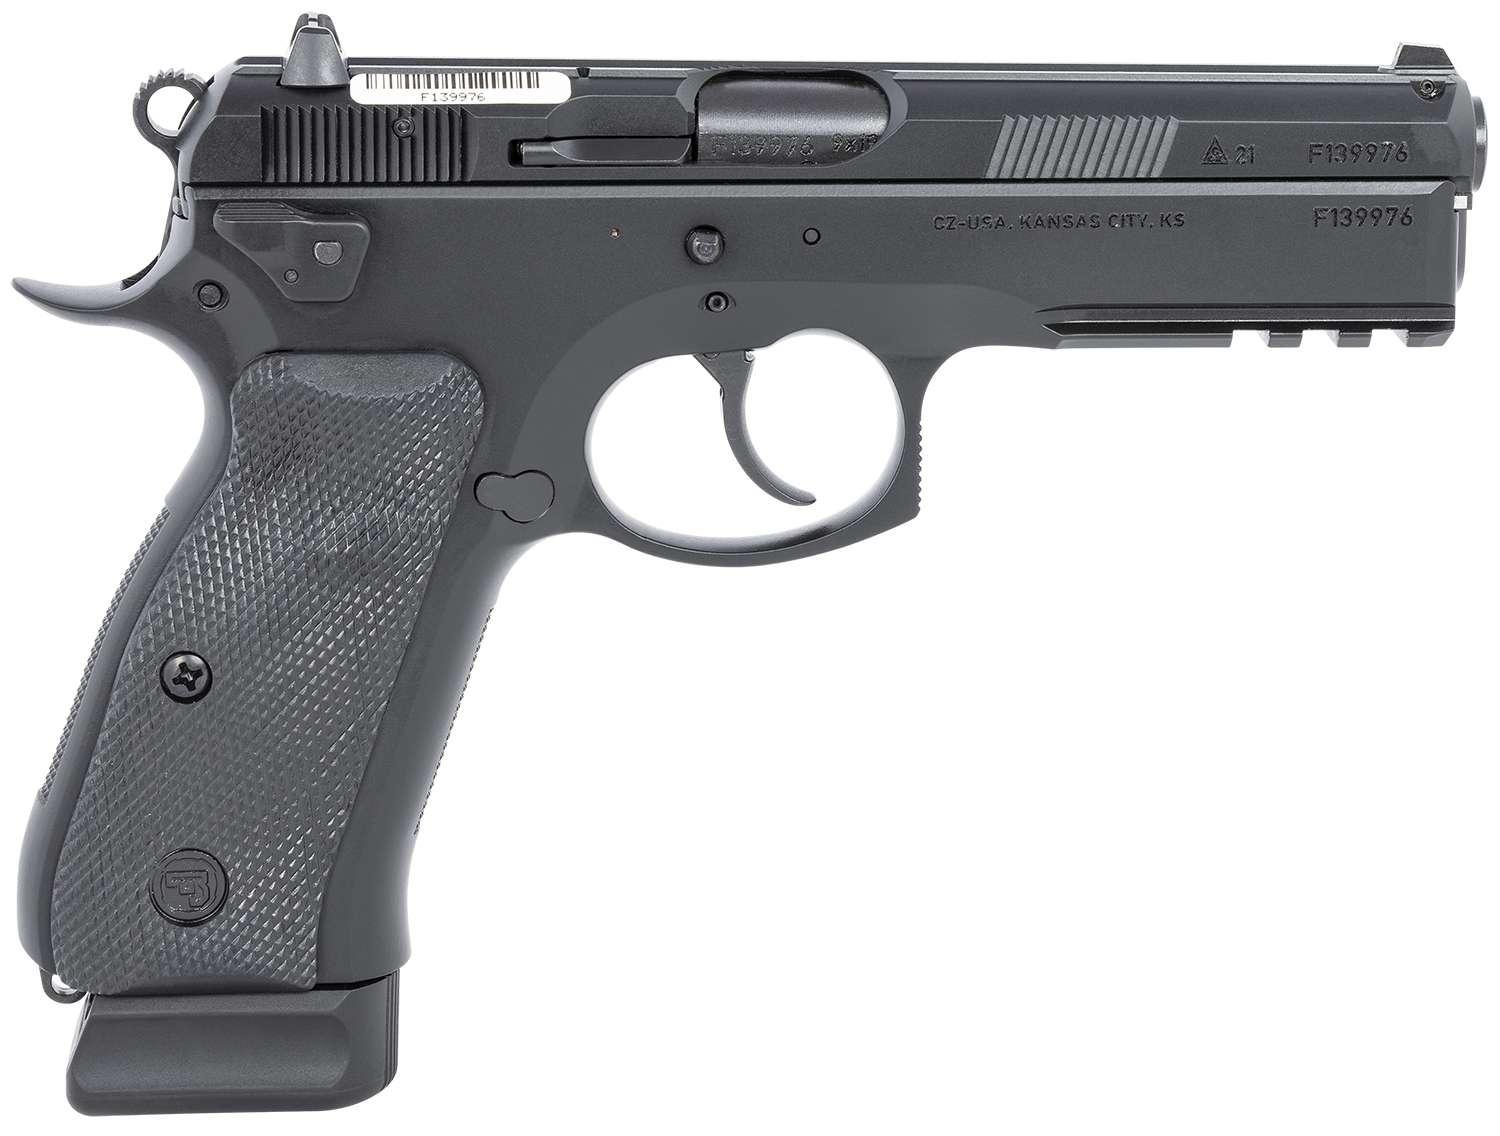 CZ CZ 75 SP-01 Tactical 9mm - $696.07 (click the Email For Price button to get this price)